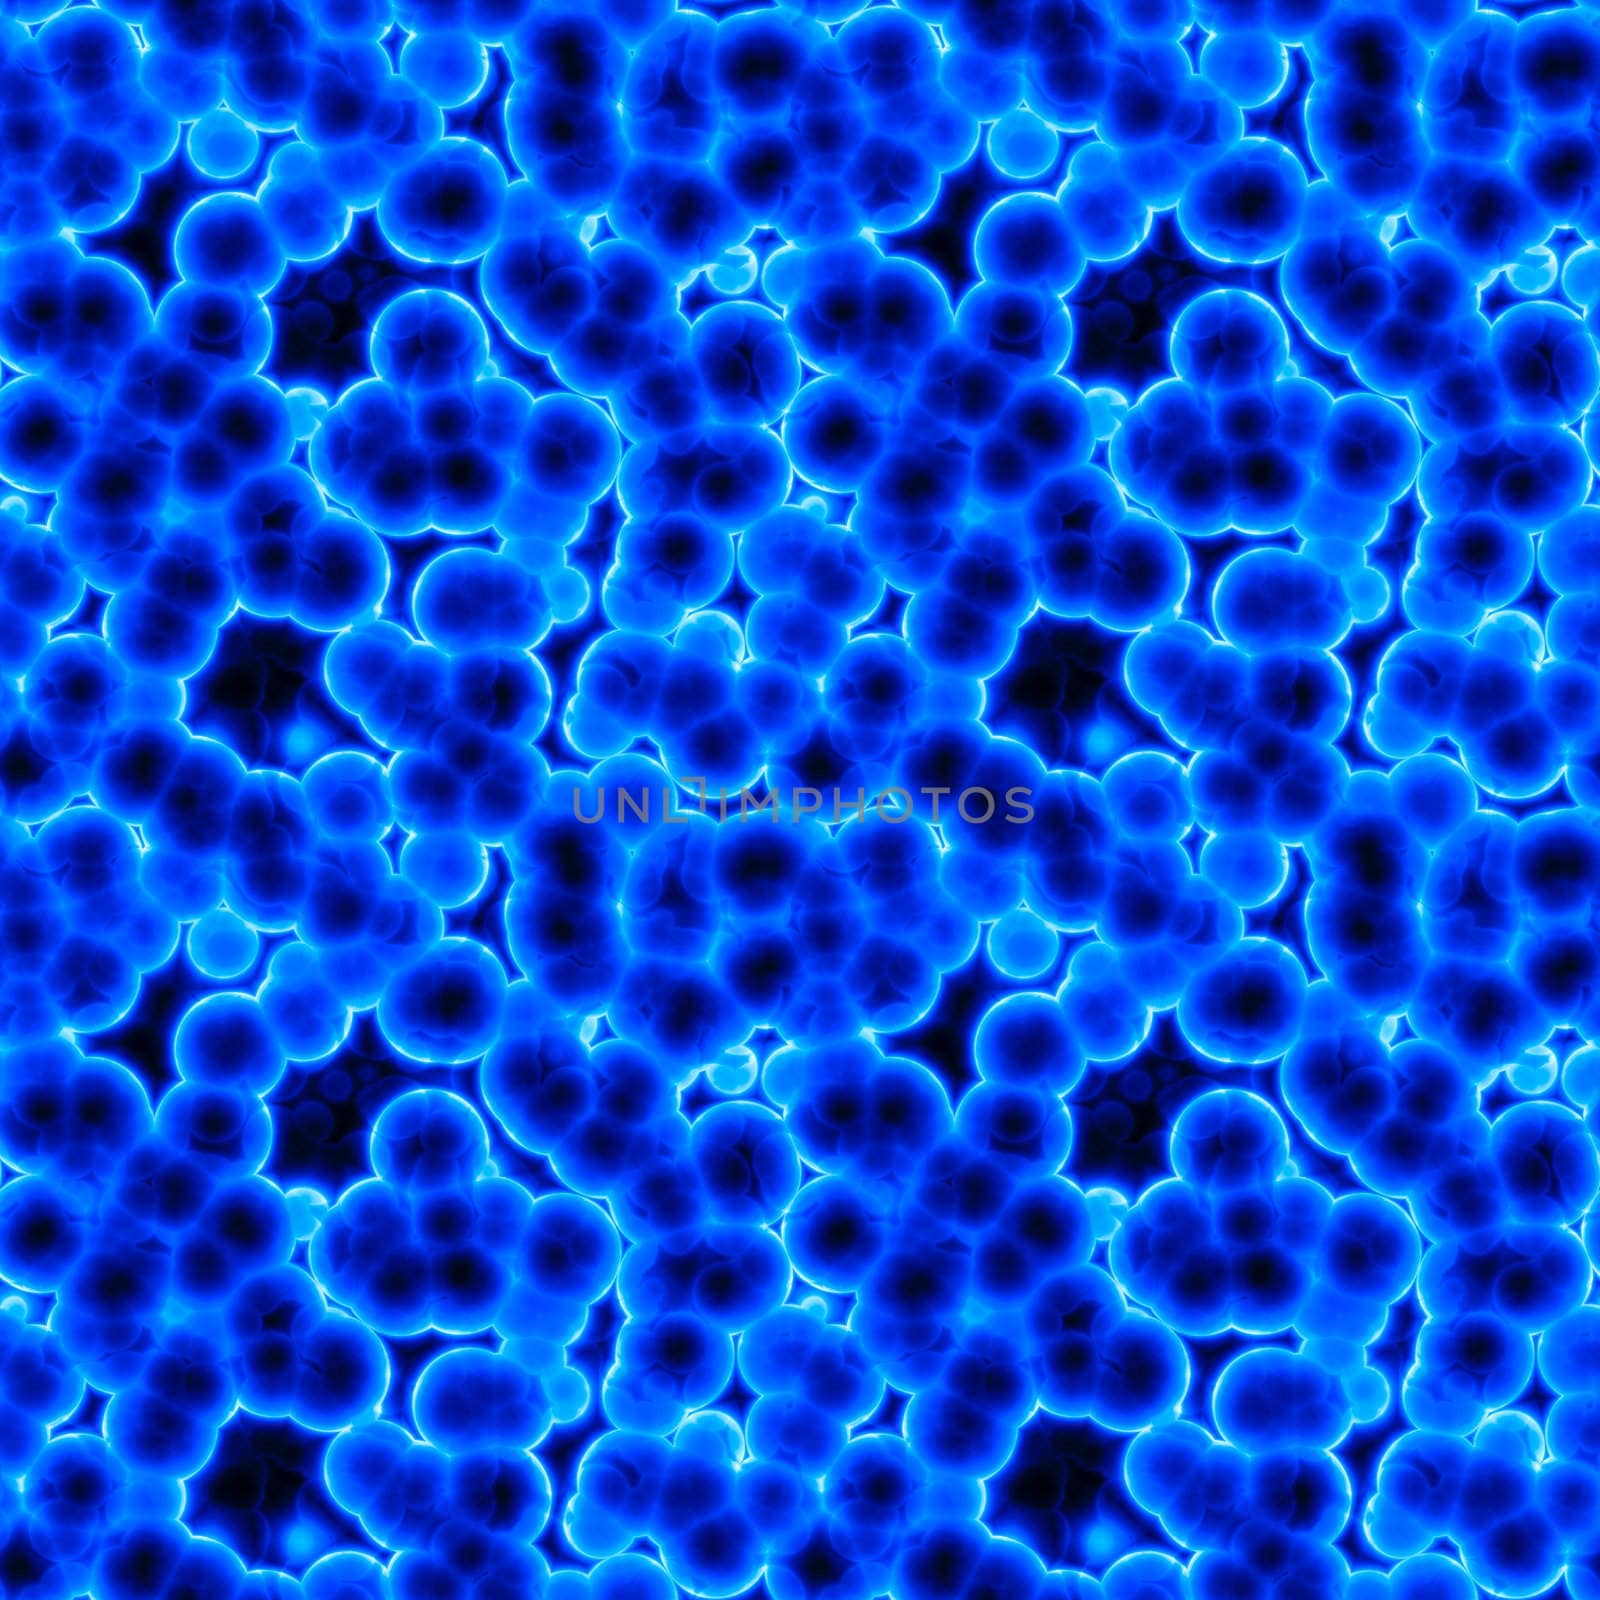 A 3D illustration of some blue viral or virus cells. This image tiles seamlessly as a pattern in any direction.